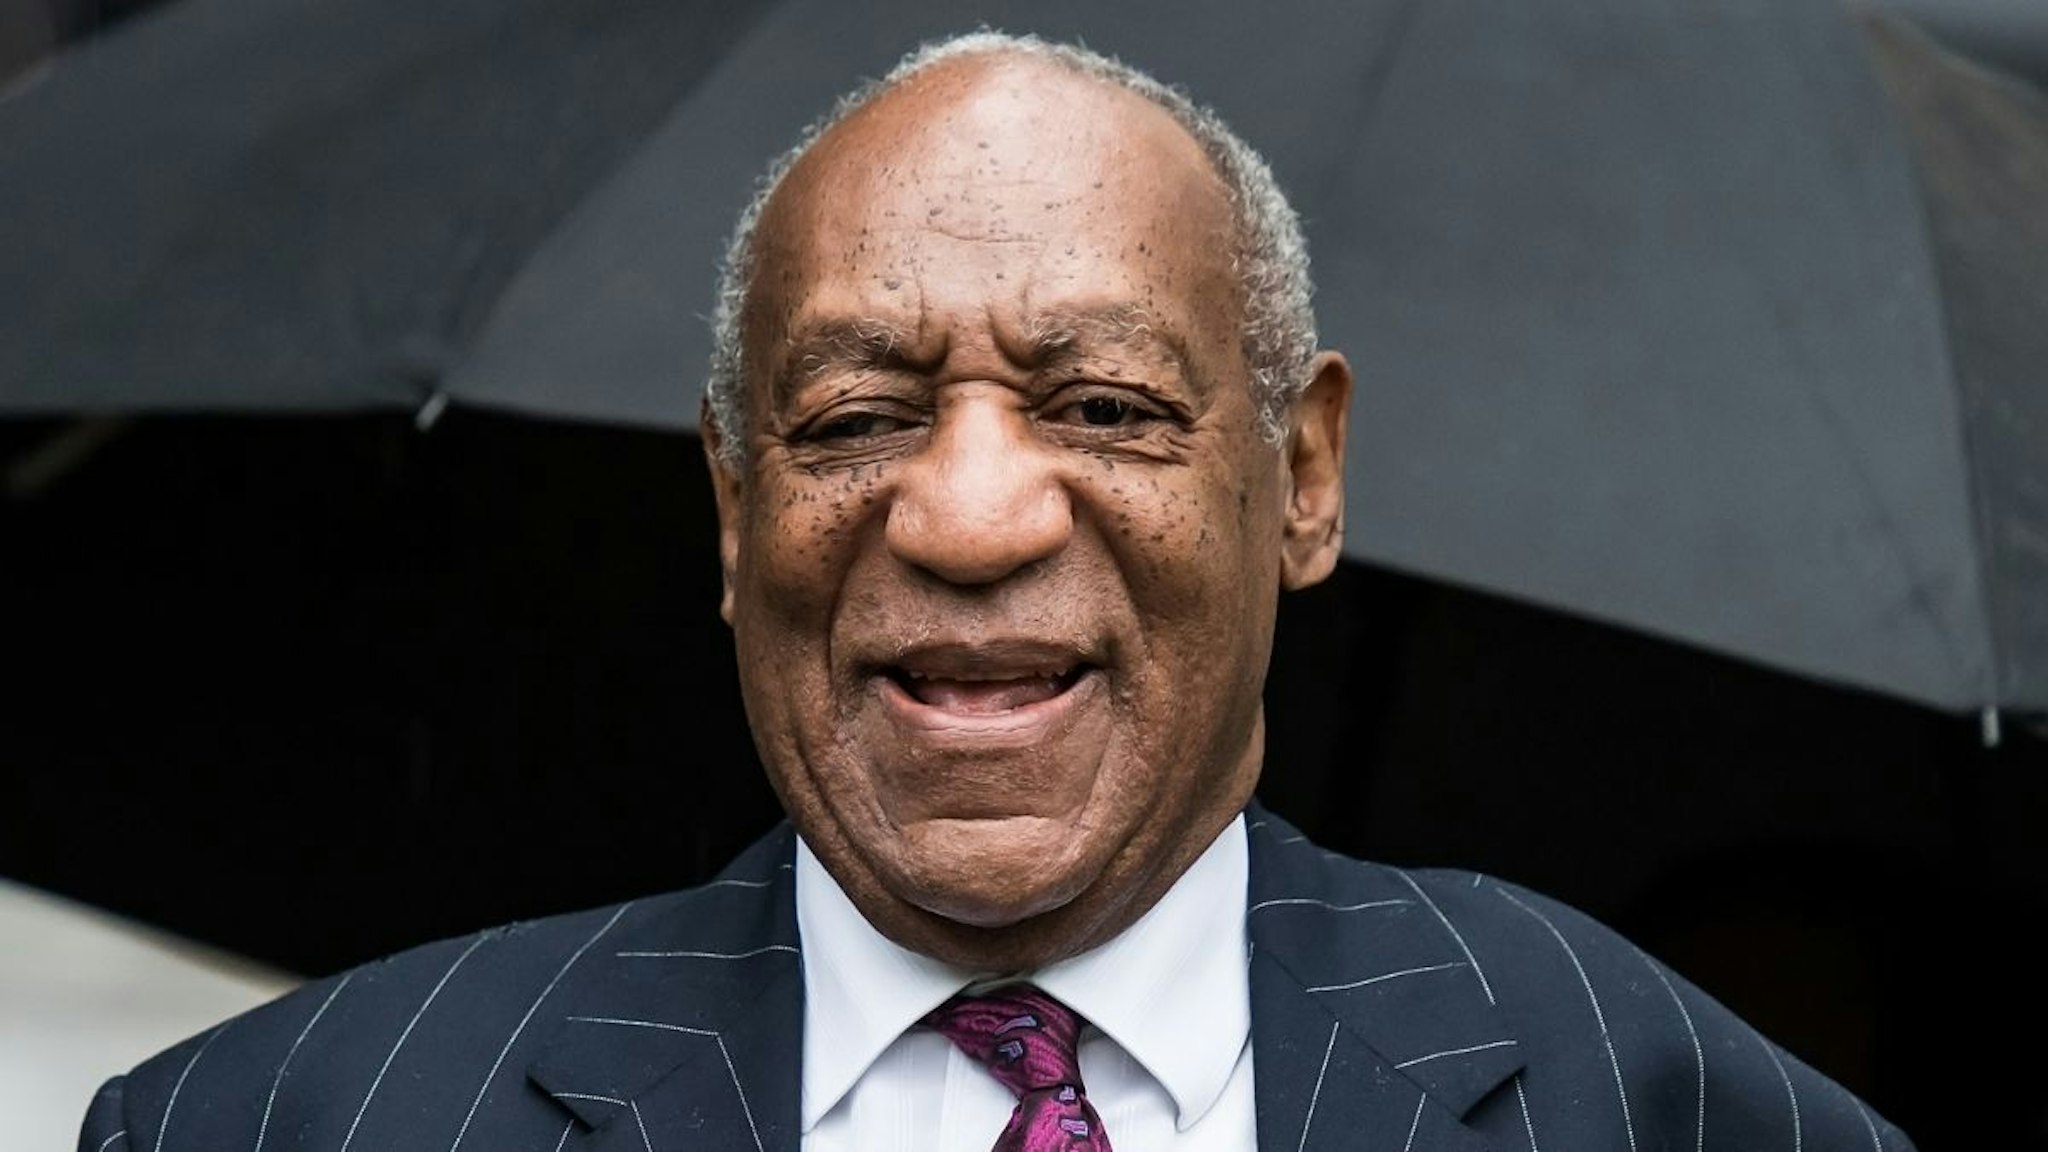 Actor/stand-up comedian Bill Cosby arrives for sentencing for his sexual assault trial at the Montgomery County Courthouse on September 25, 2018 in Norristown, Pennsylvania.